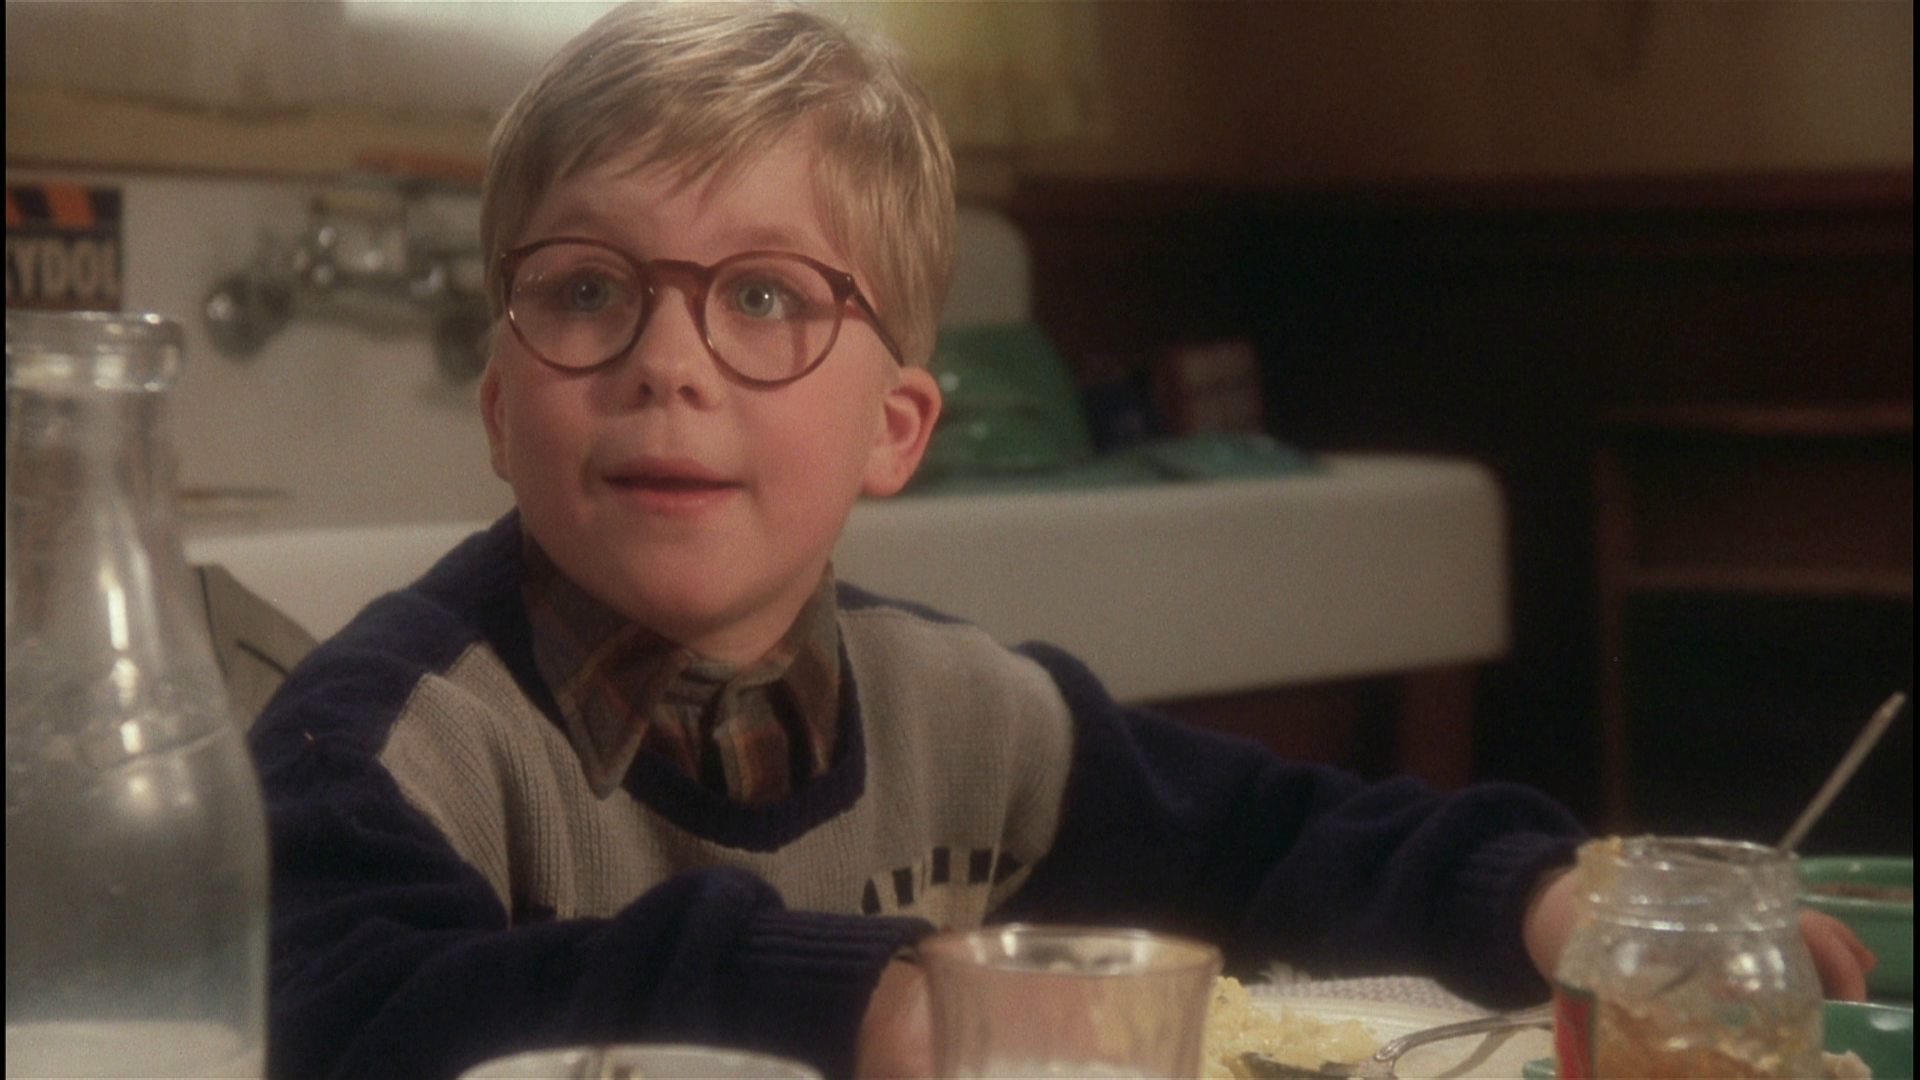 Peter Billingsley as Ralphie in A Christmas Story